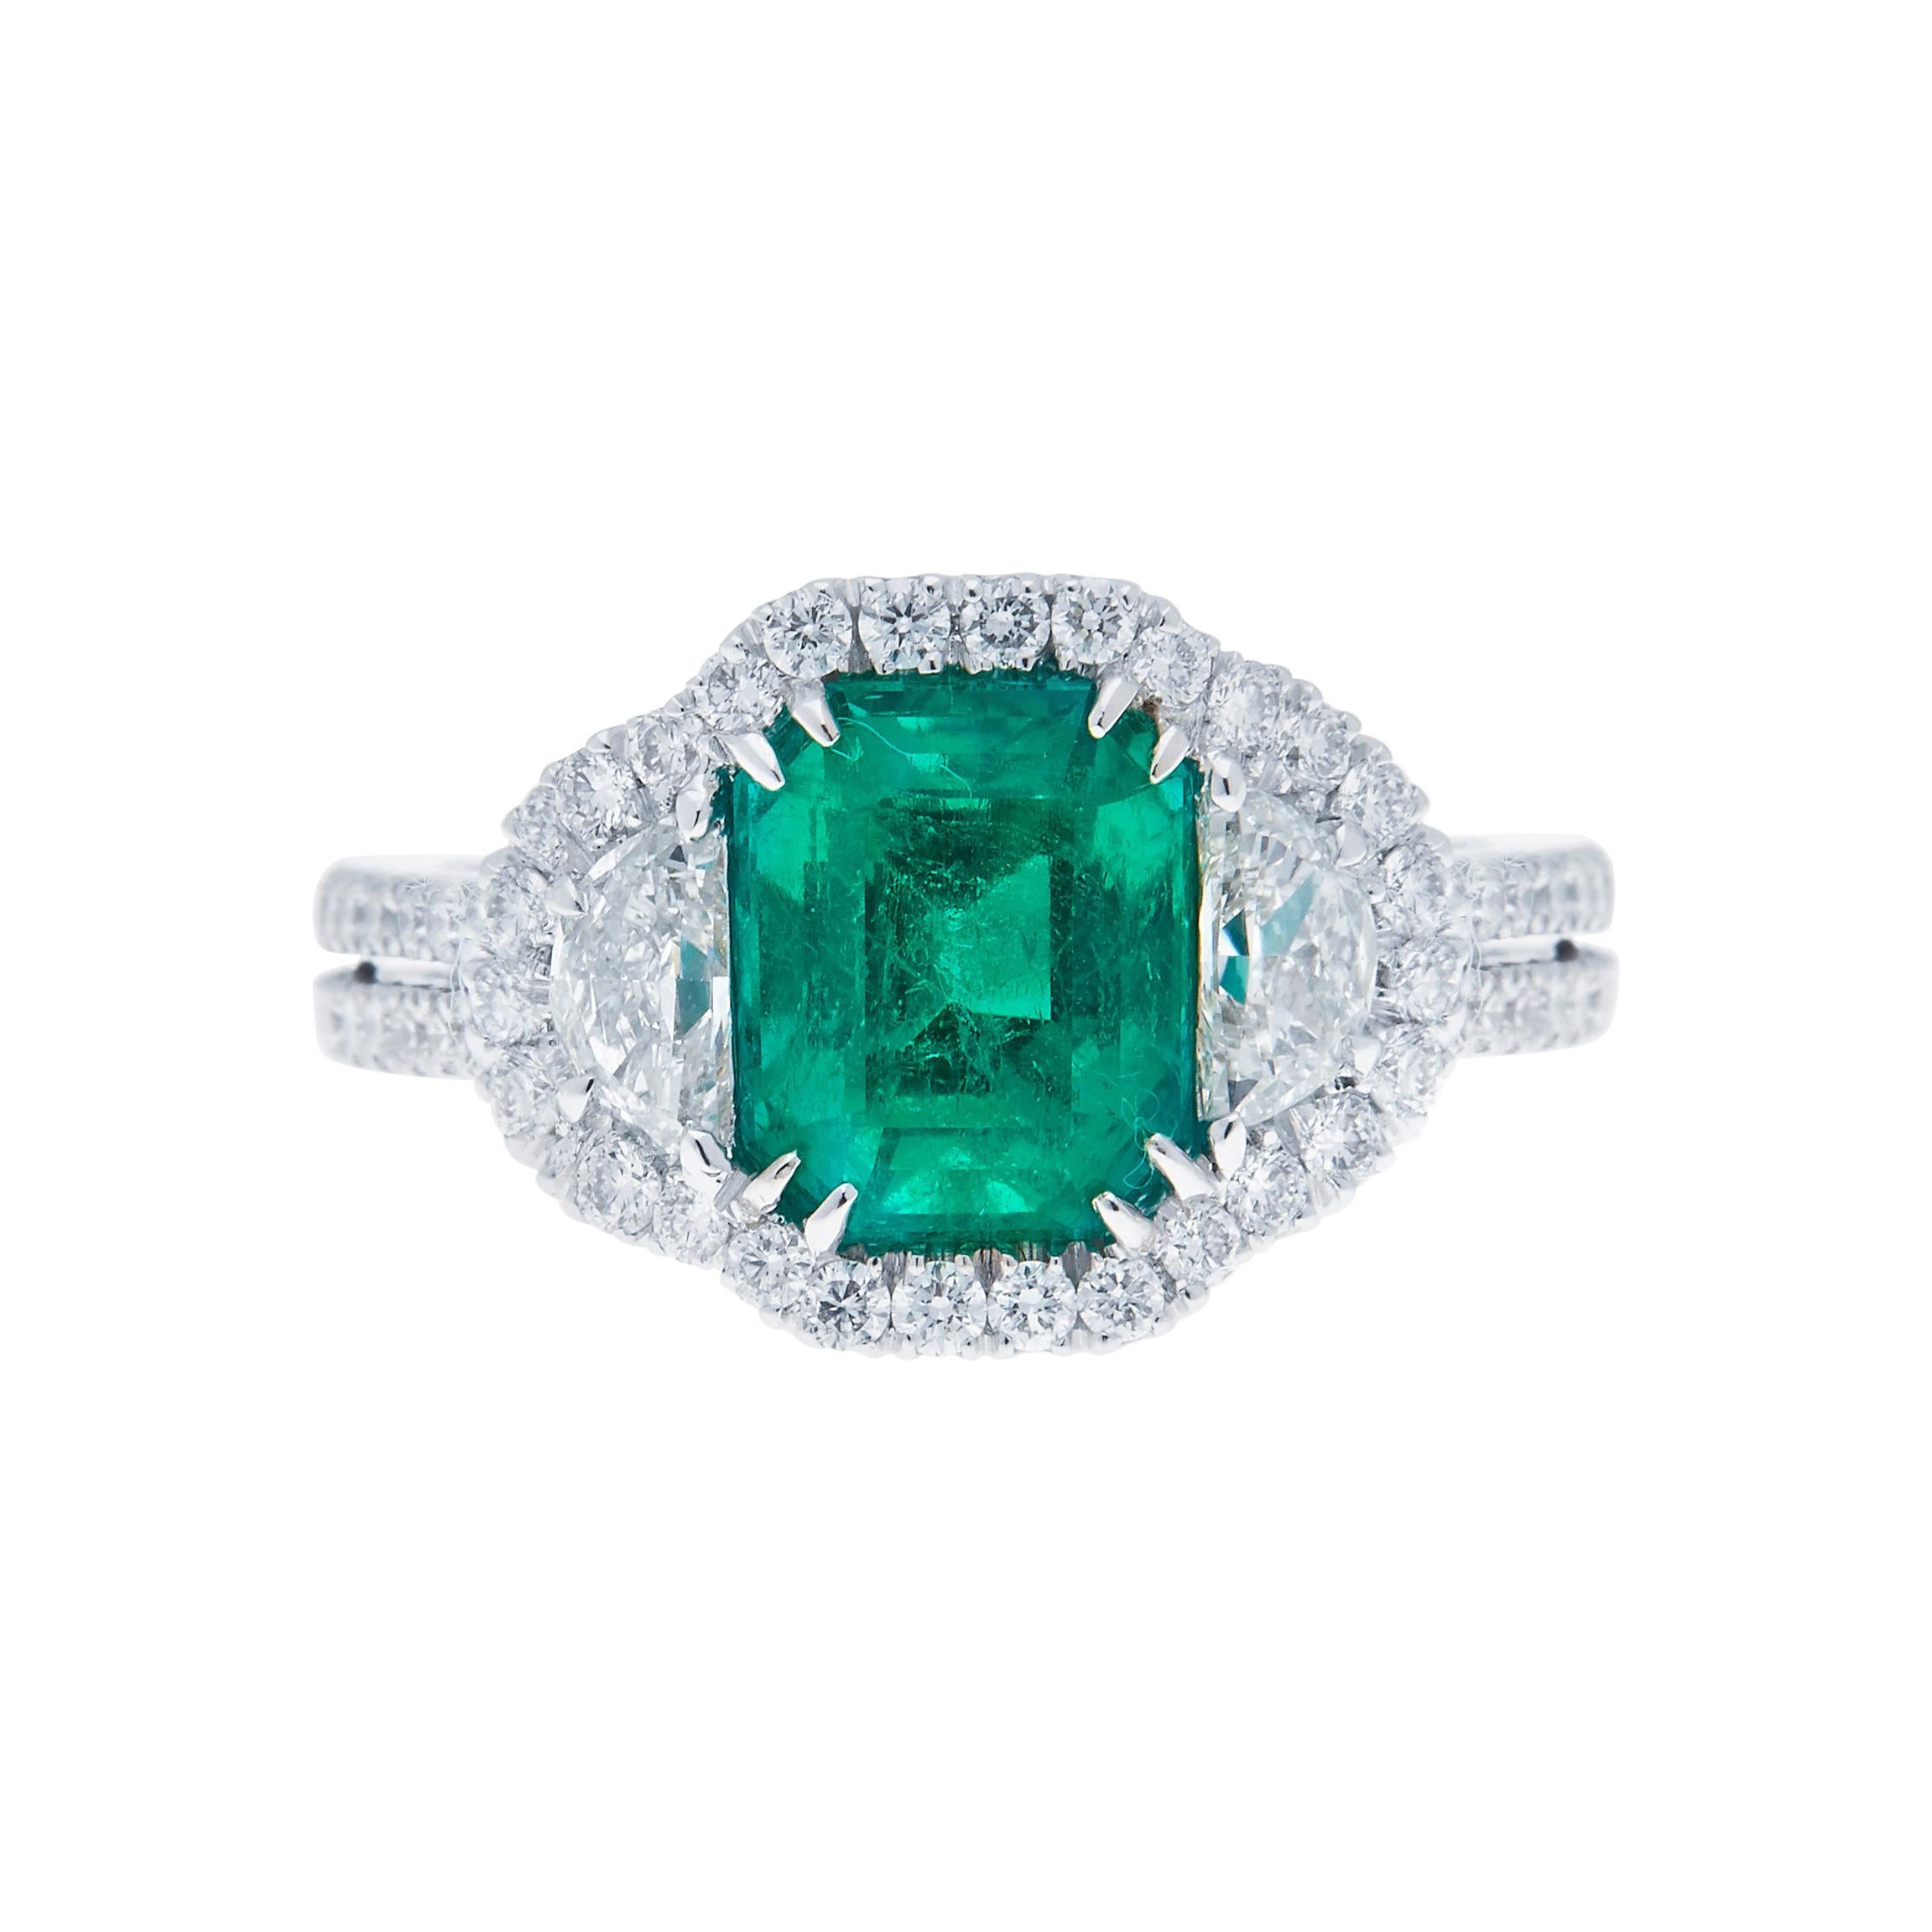 18kt White Gold Emerald Ring with 2.31ct Emerald and Diamond Accents For Sale